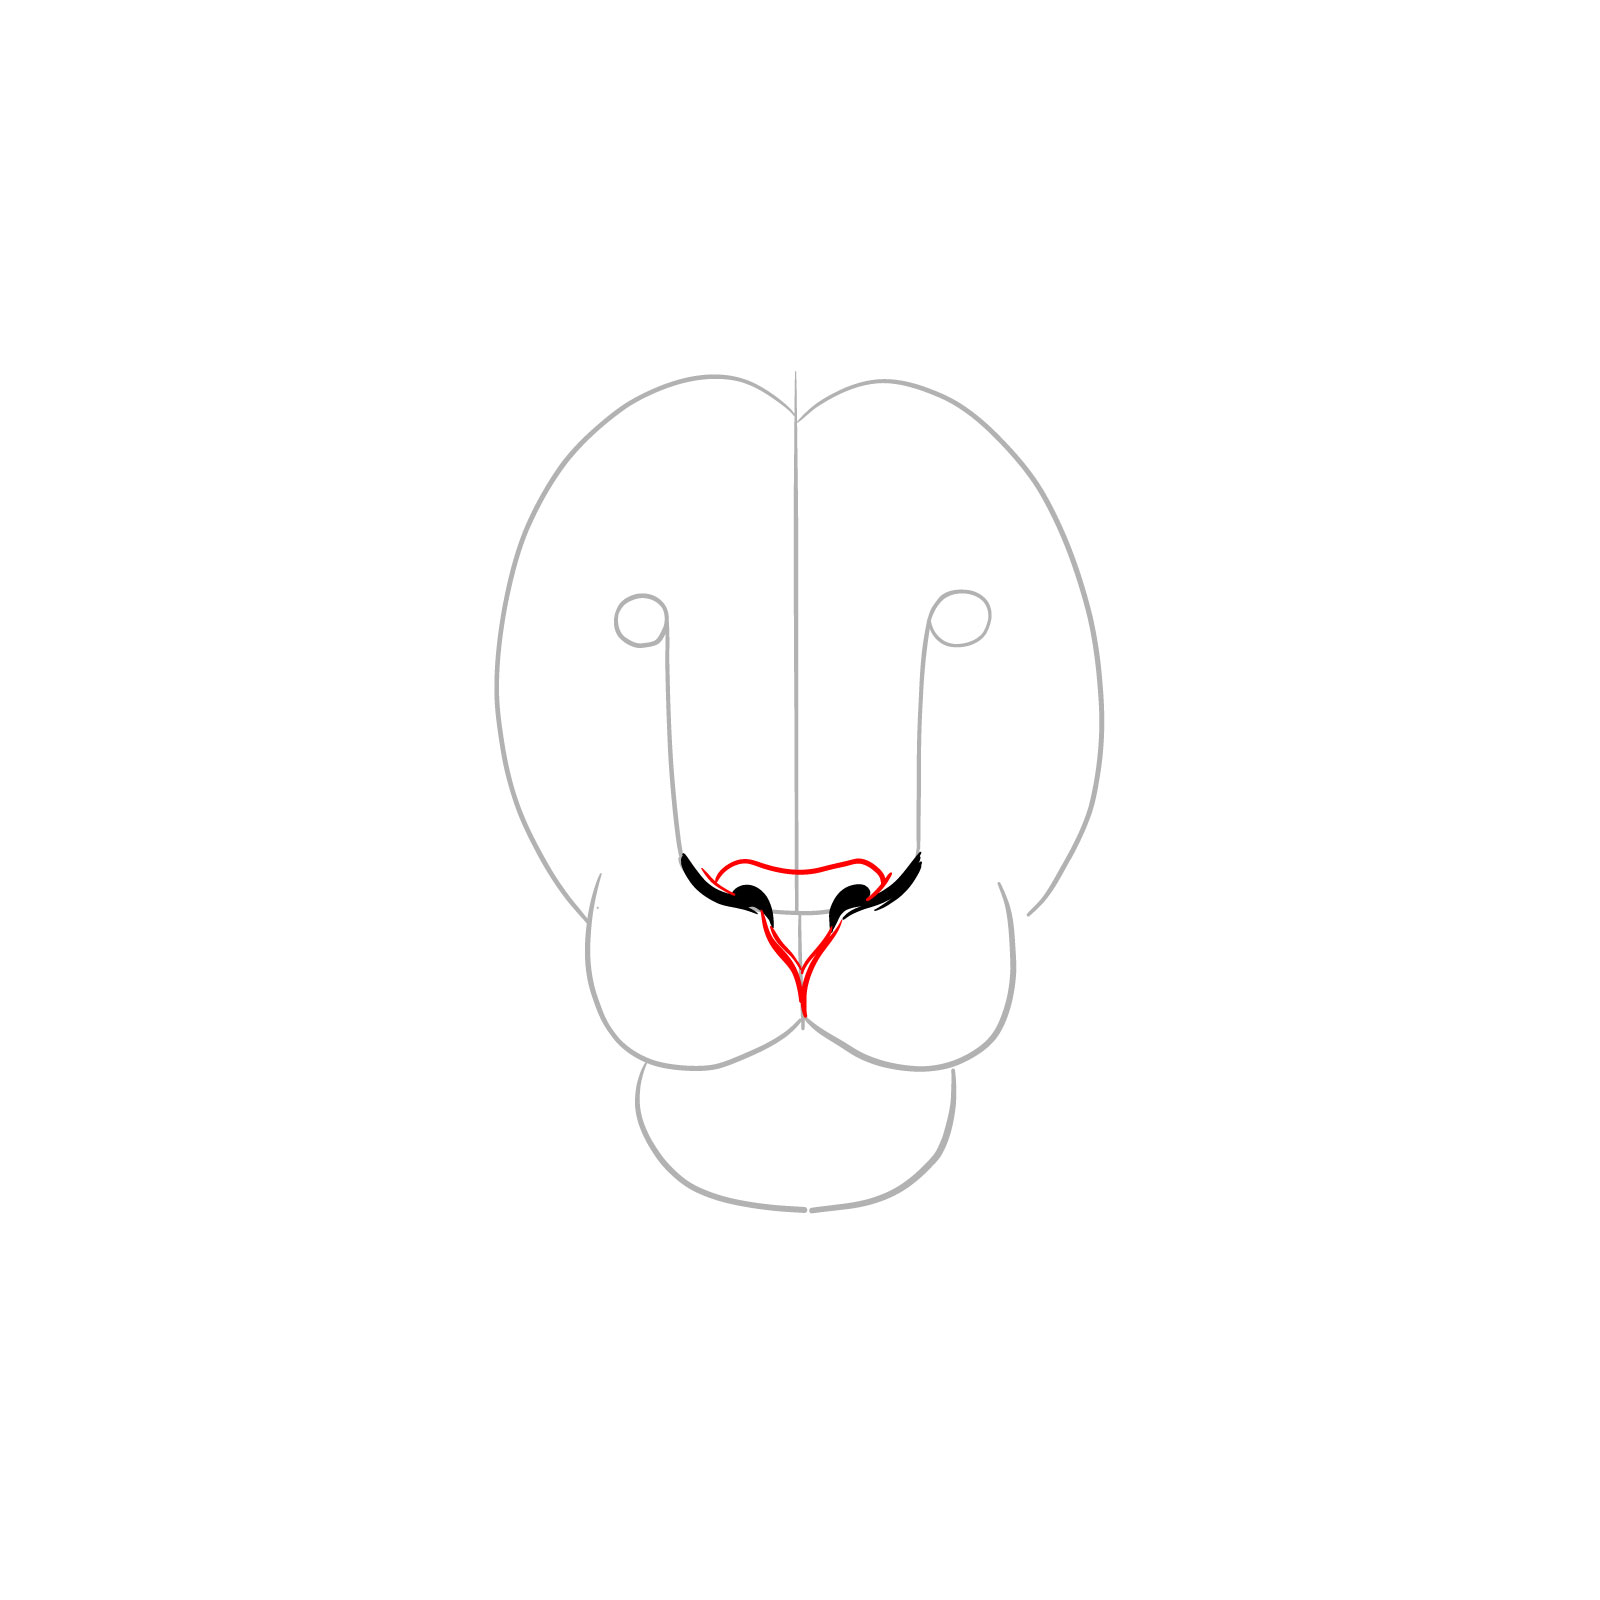 Shaping the nose in a lion's face front view drawing - step 03